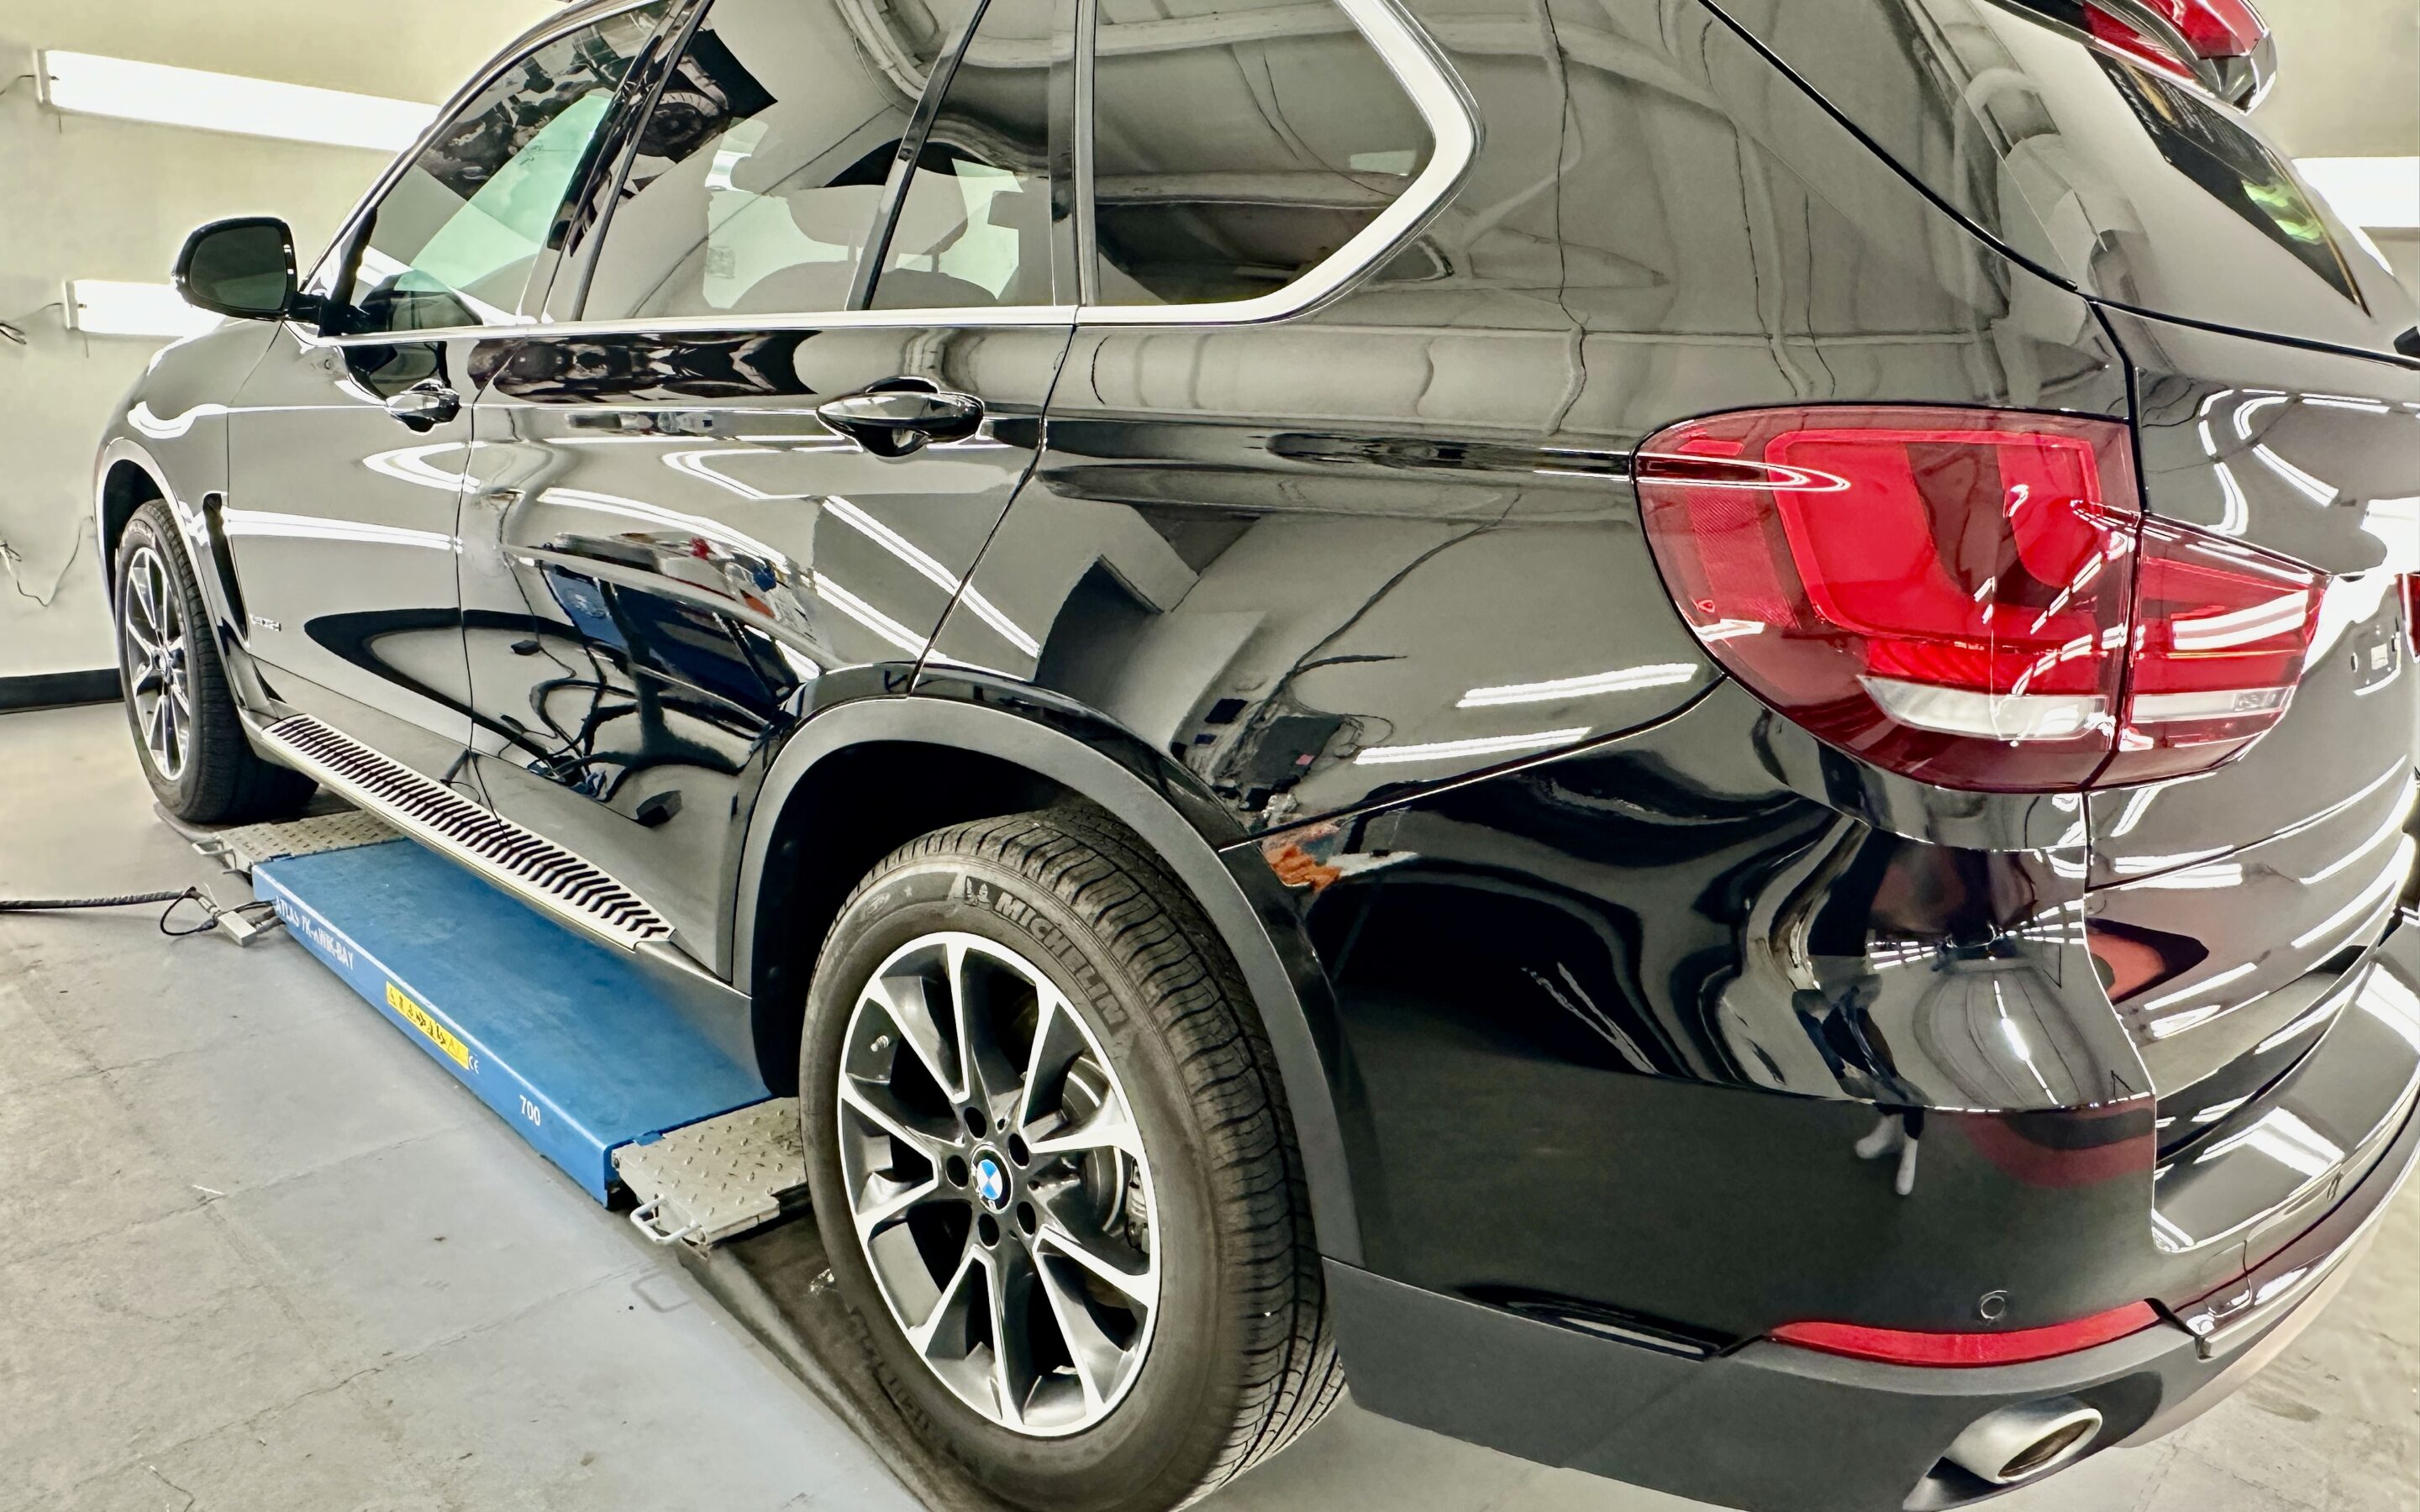 Paint Protection Film (PPF) of a 2018 BMW X5